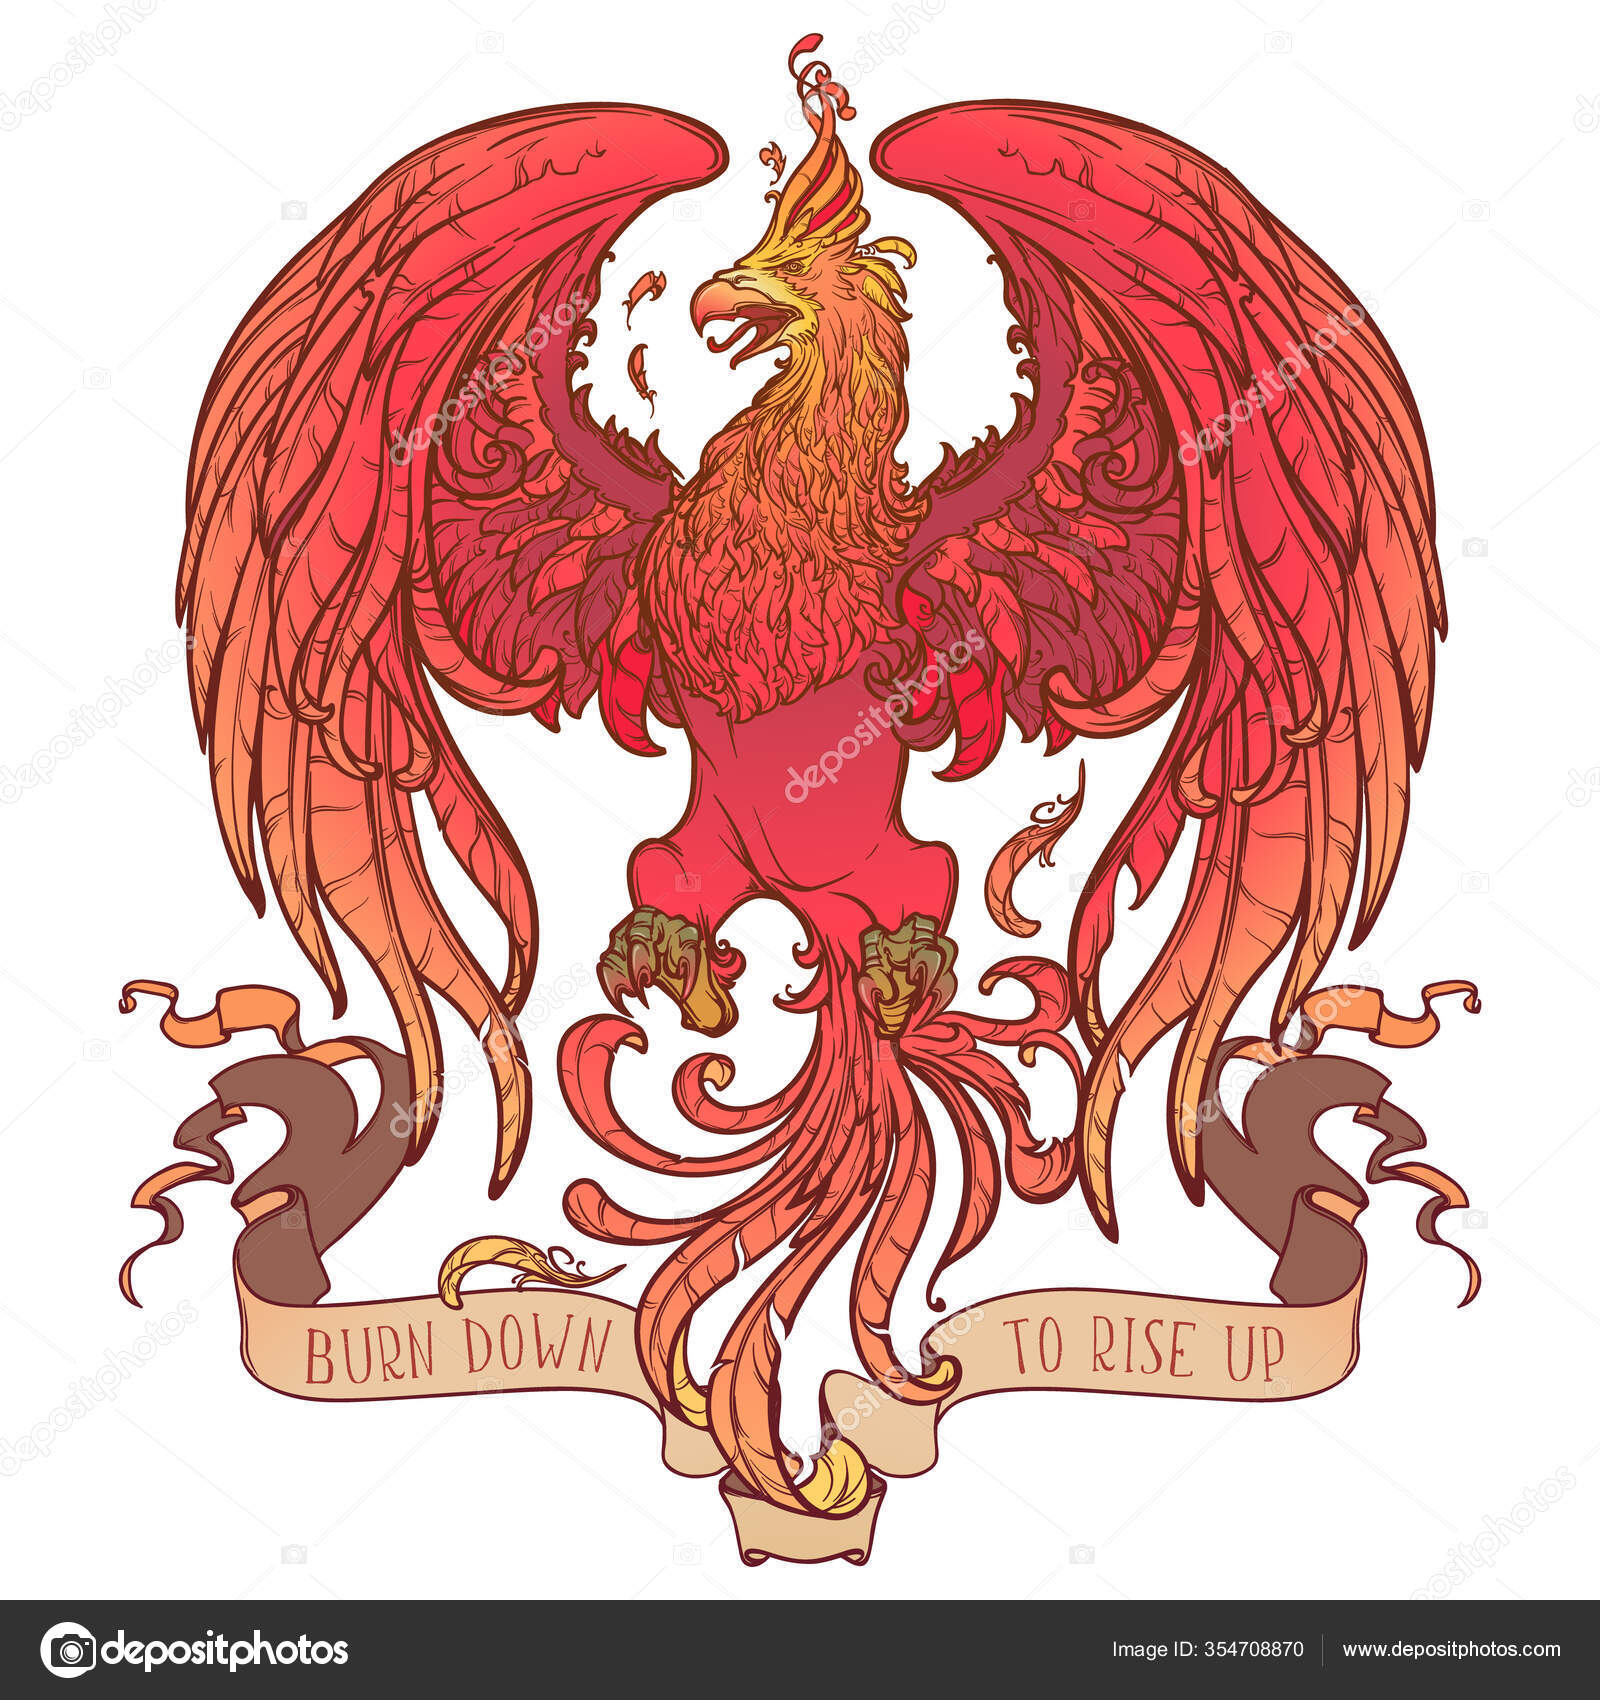 Phoenix Woman Bird High-Res Vector Graphic - Getty Images